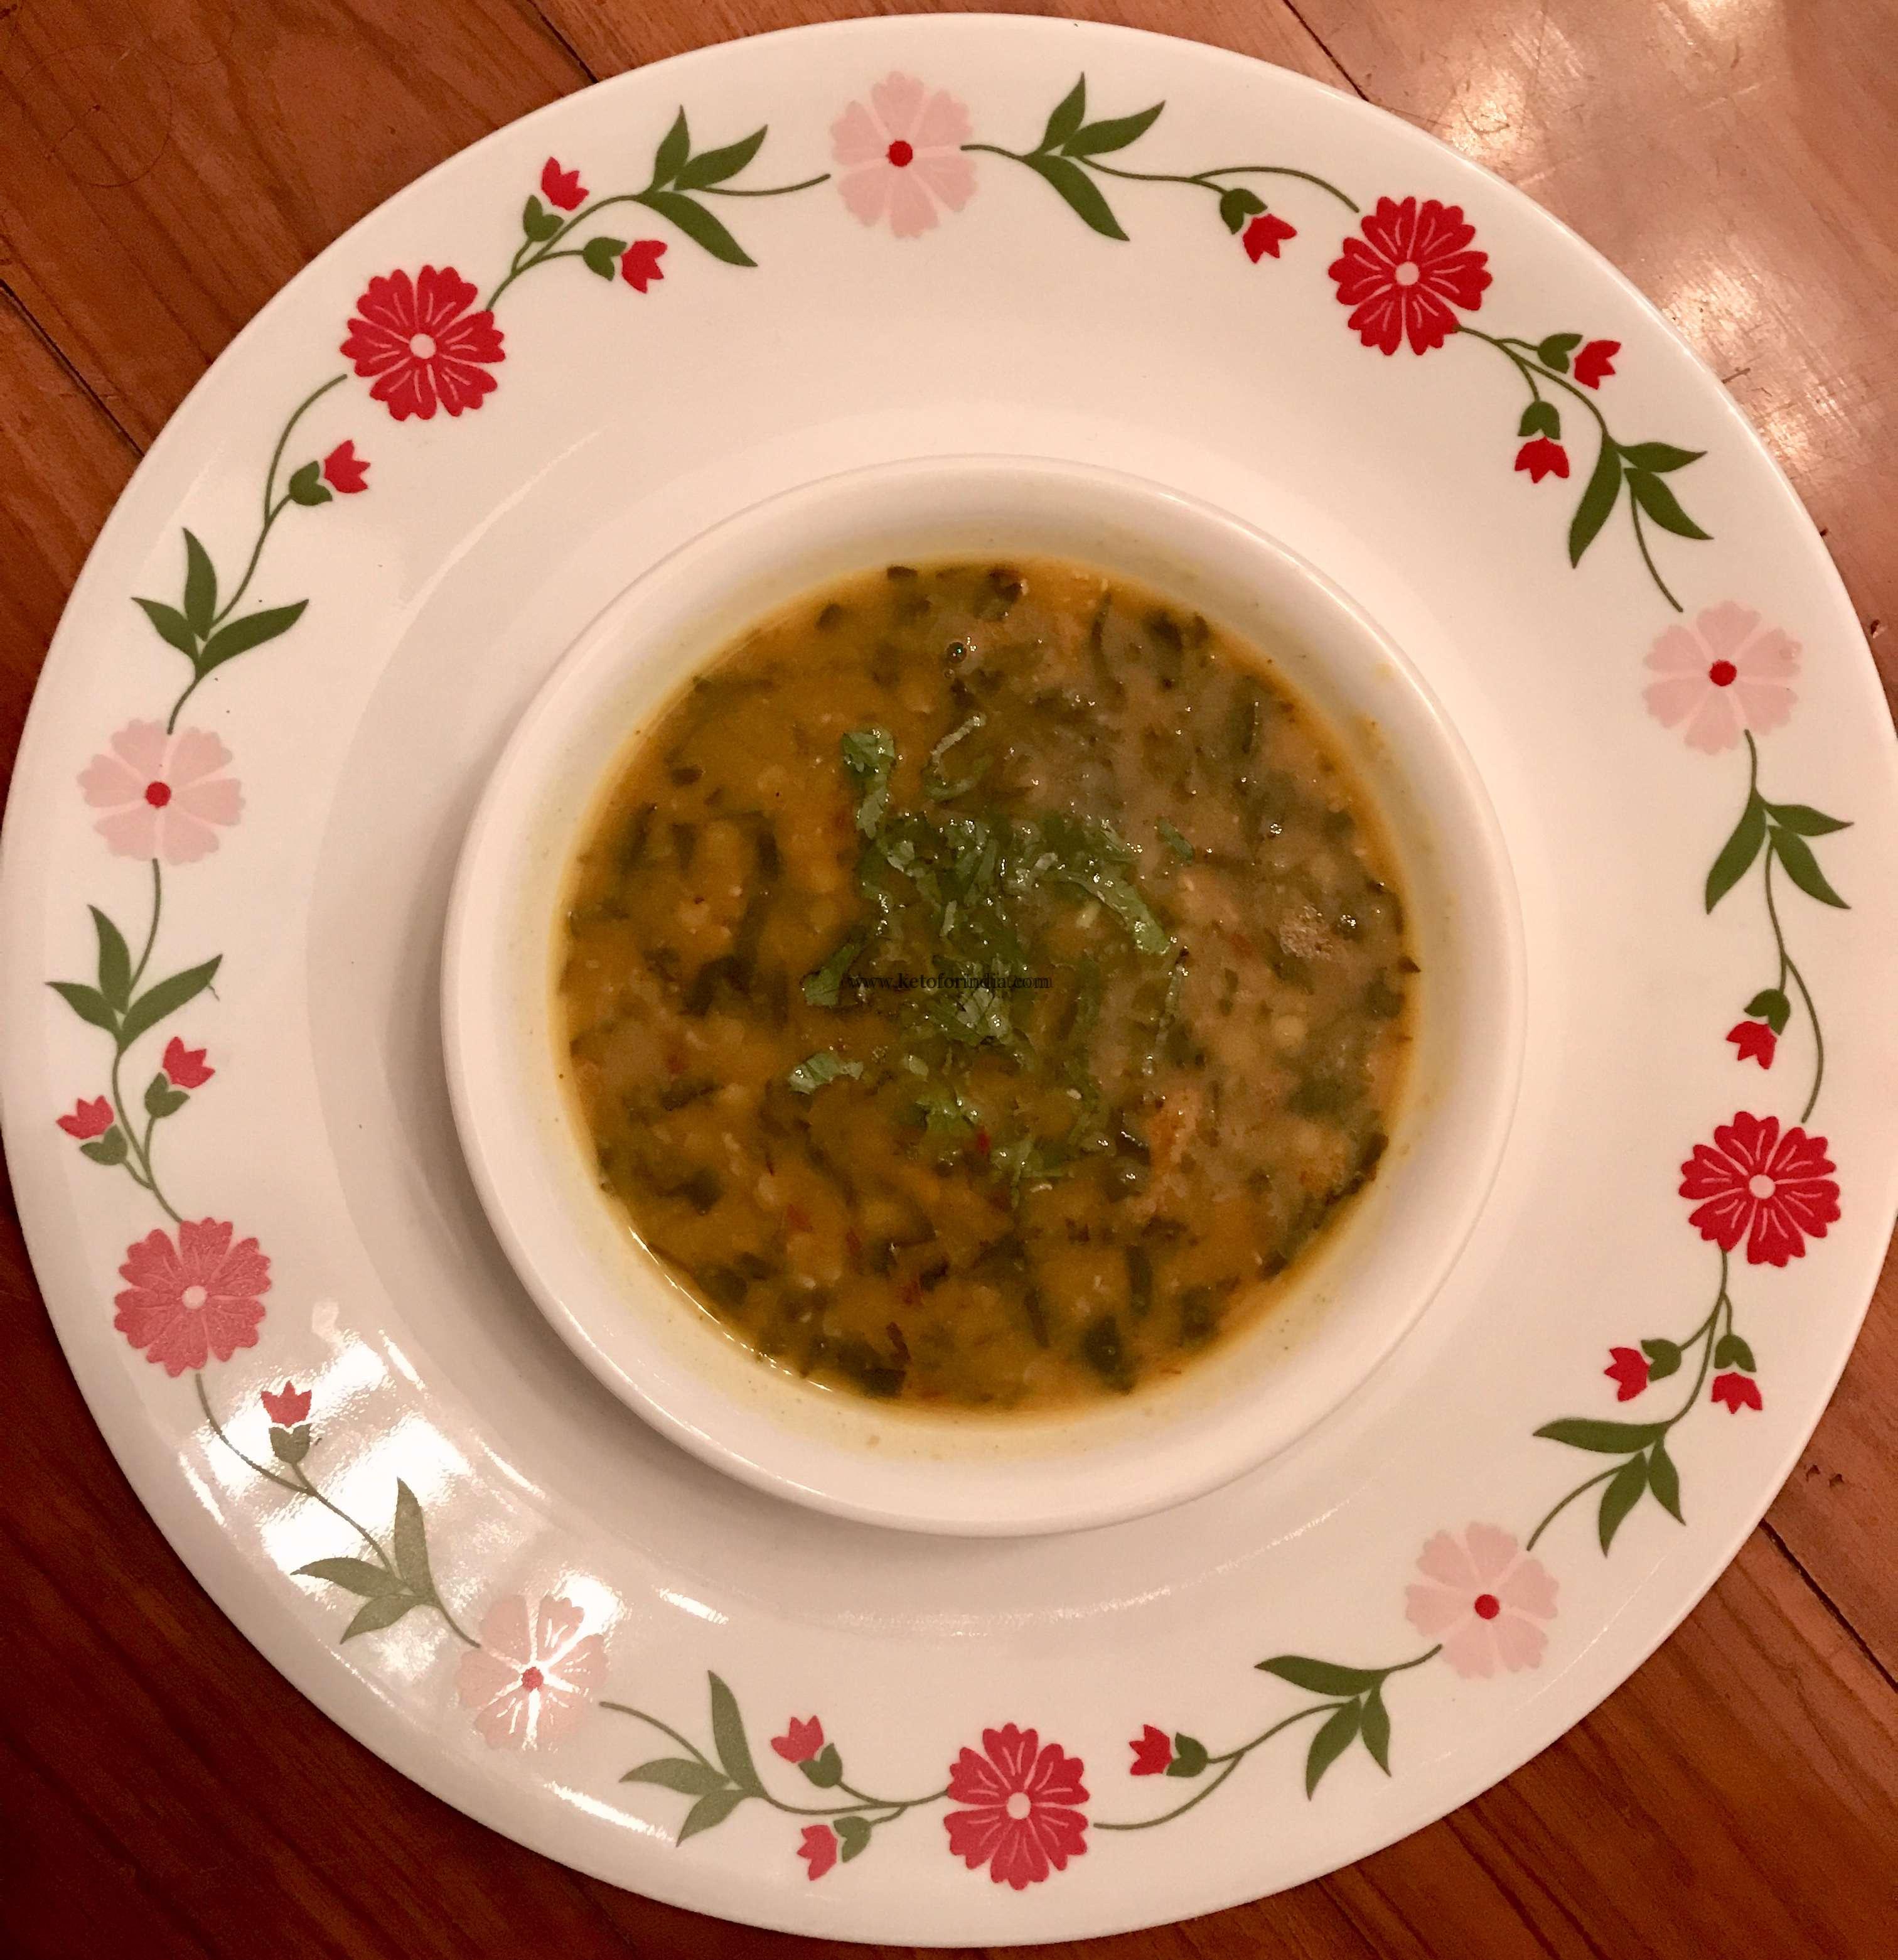 daal - easy to make healthy food!
